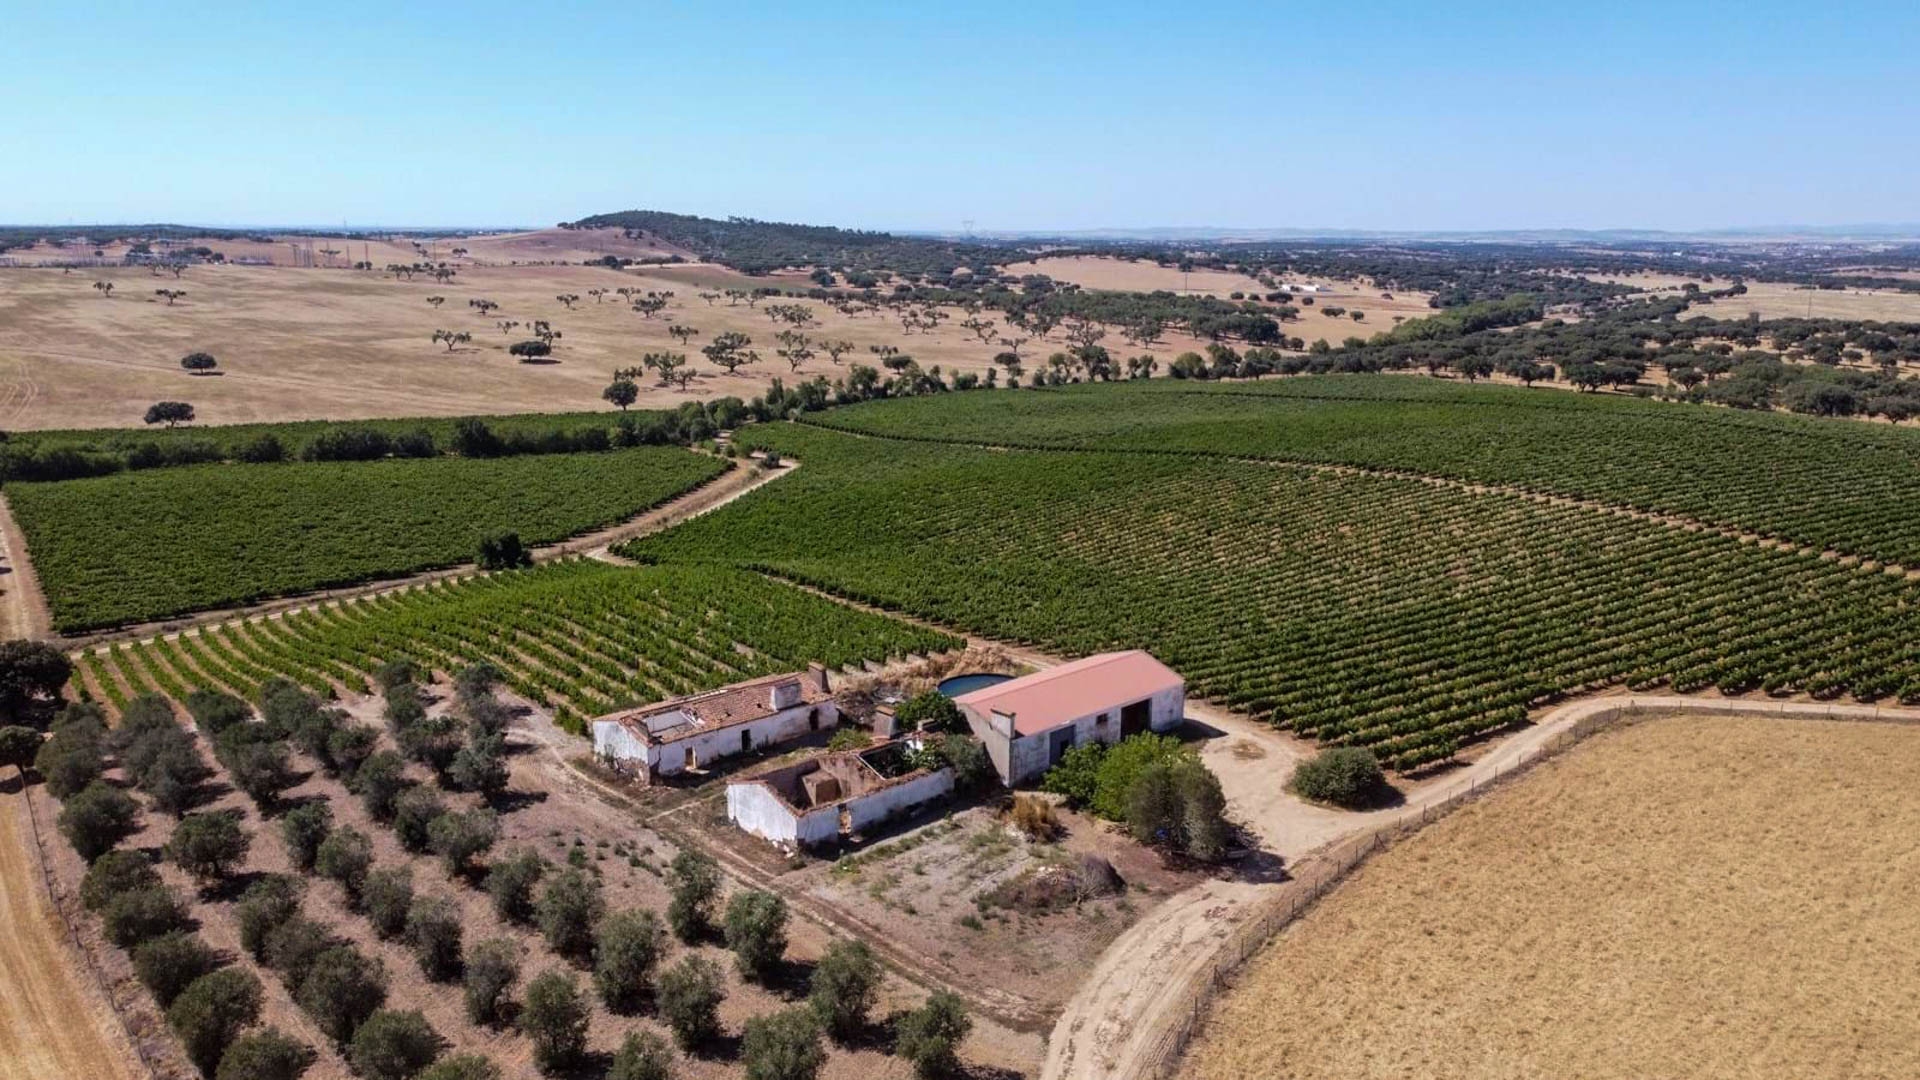 Plot of 20 Hectares with 16 Hectares of Vineyard and Ruins in Estremoz, Alentejo | PDBED004 Great opportunity to buy a huge land with 16 ha active vineyards and olive groves as well as outbuildings and ruins to be rebuilt or used for rural tourism project in an unspoilt nature in the Alentejo.